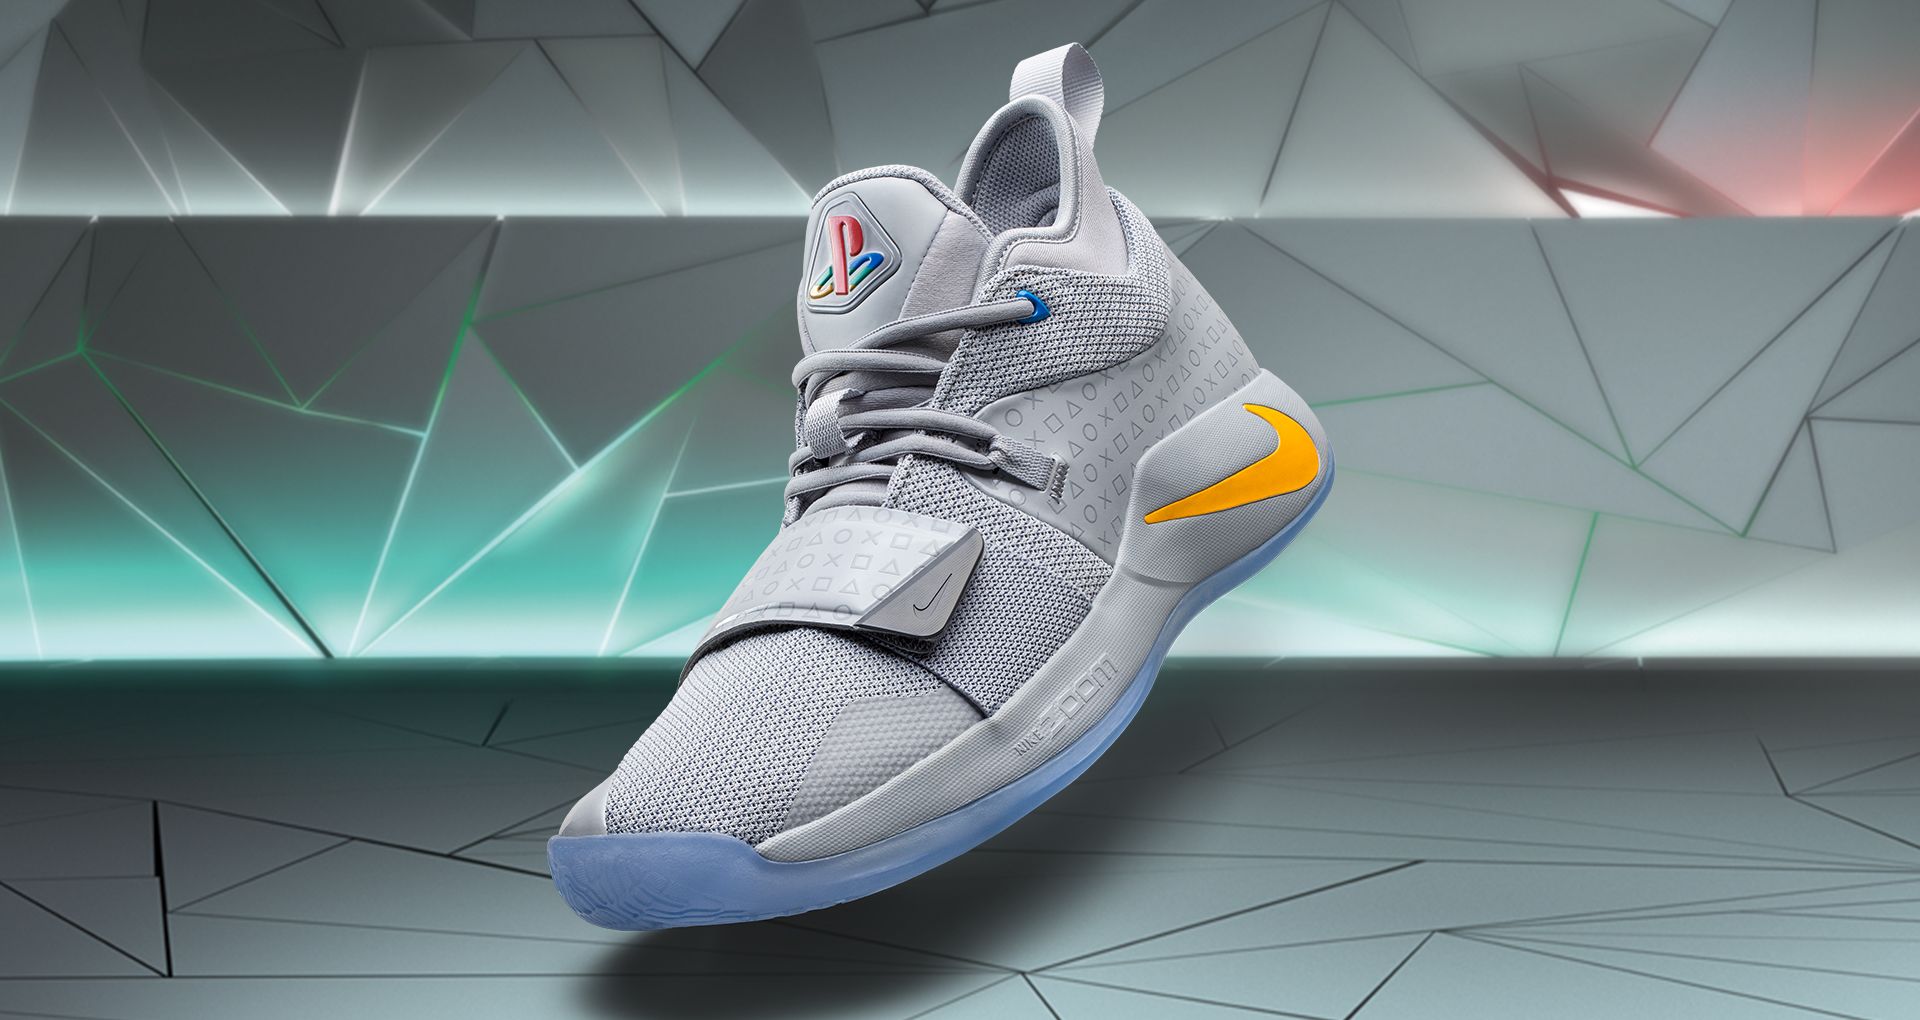 Behind The Design: PG 2.5 x PlayStation ®. Nike SNKRS GB